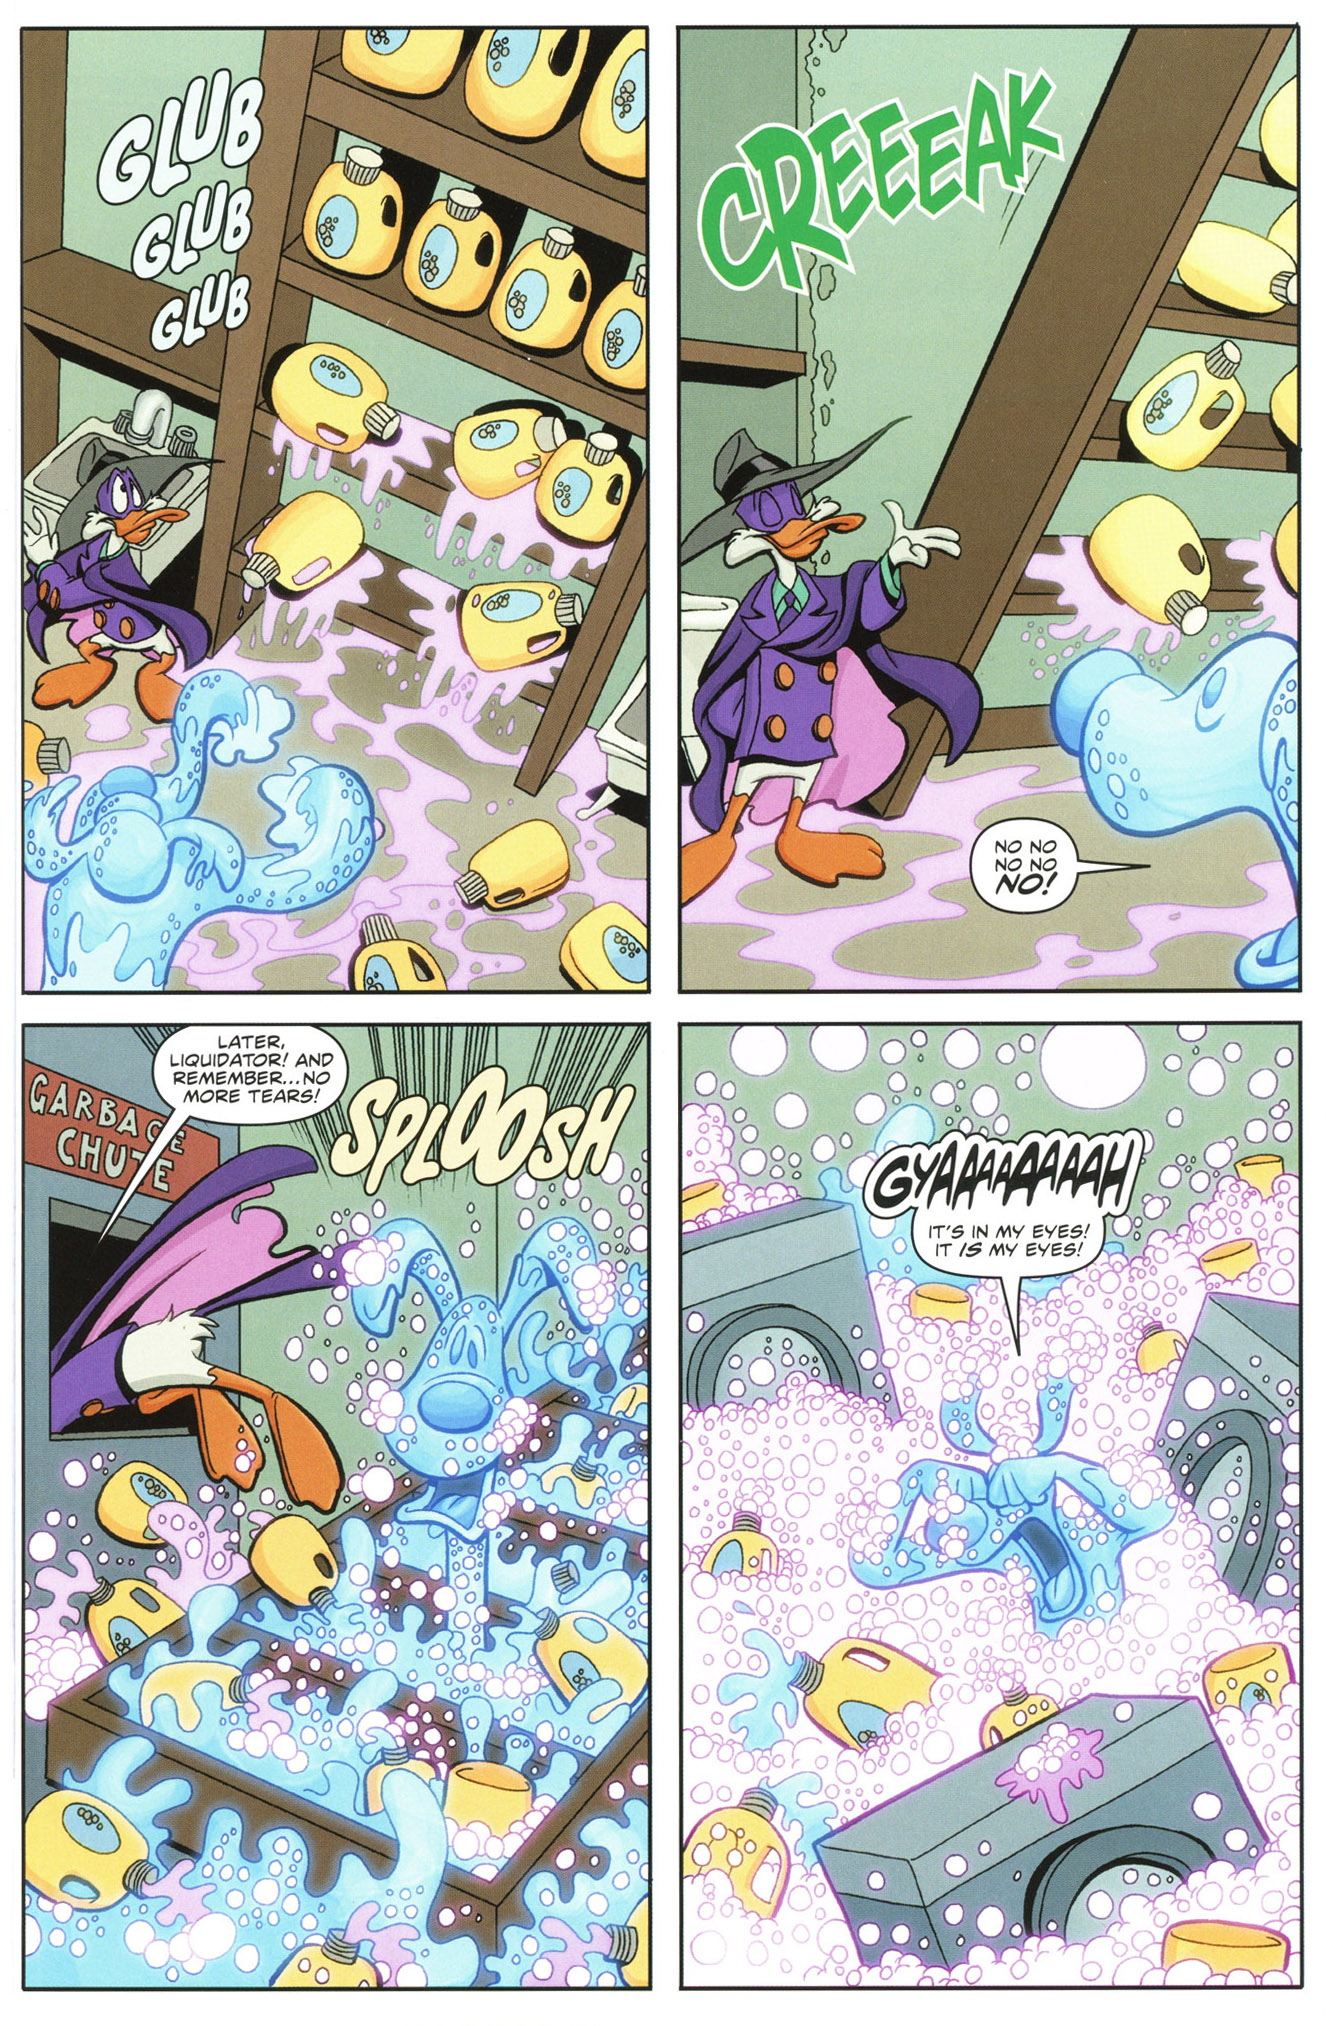 Disney Darkwing Duck 16 Chapter 2 Page 7